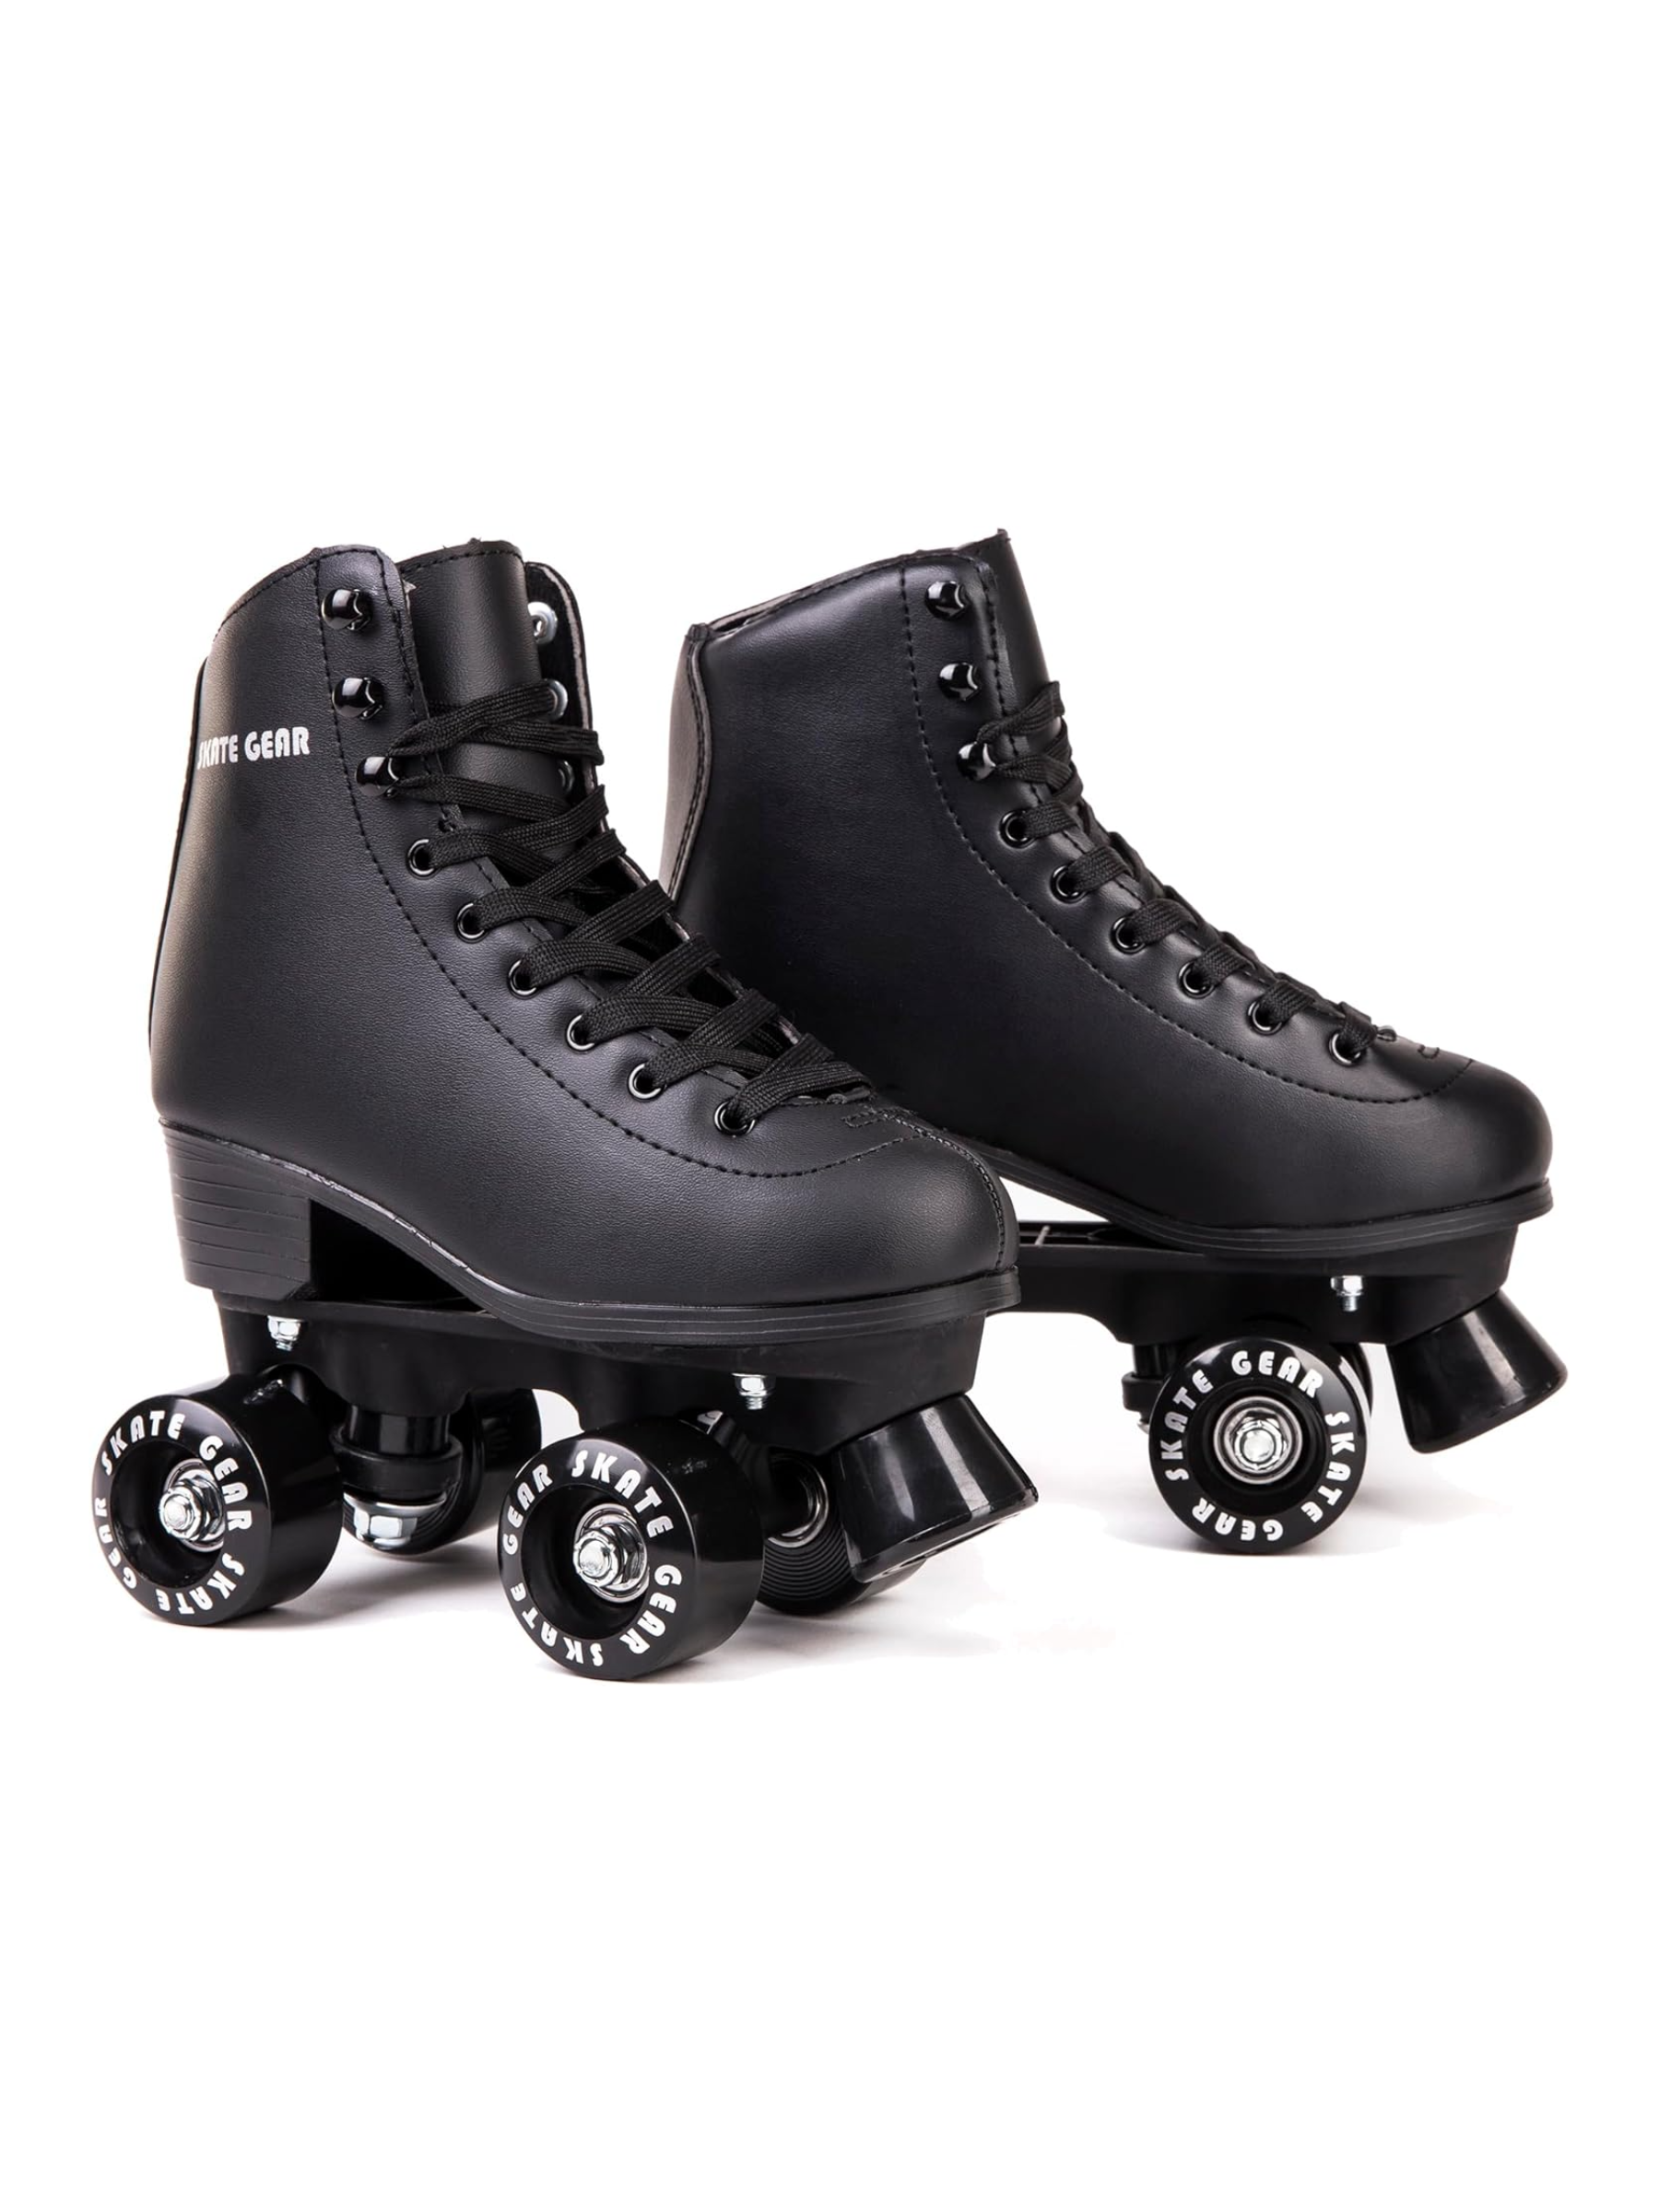 Share a bit of nostalgia from your teenage years or unlock a new hobby for them with a pair of retro roller skates. These come in seven color combos and reviewers suggest sizing up if your teen wears a half-size. $47, Amazon. <a href="https://www.amazon.com/dp/B08FRQQR4Y?">Get it now!</a><p>Sign up for today’s biggest stories, from pop culture to politics.</p><a href="https://www.glamour.com/newsletter/news?sourceCode=msnsend">Sign Up</a>